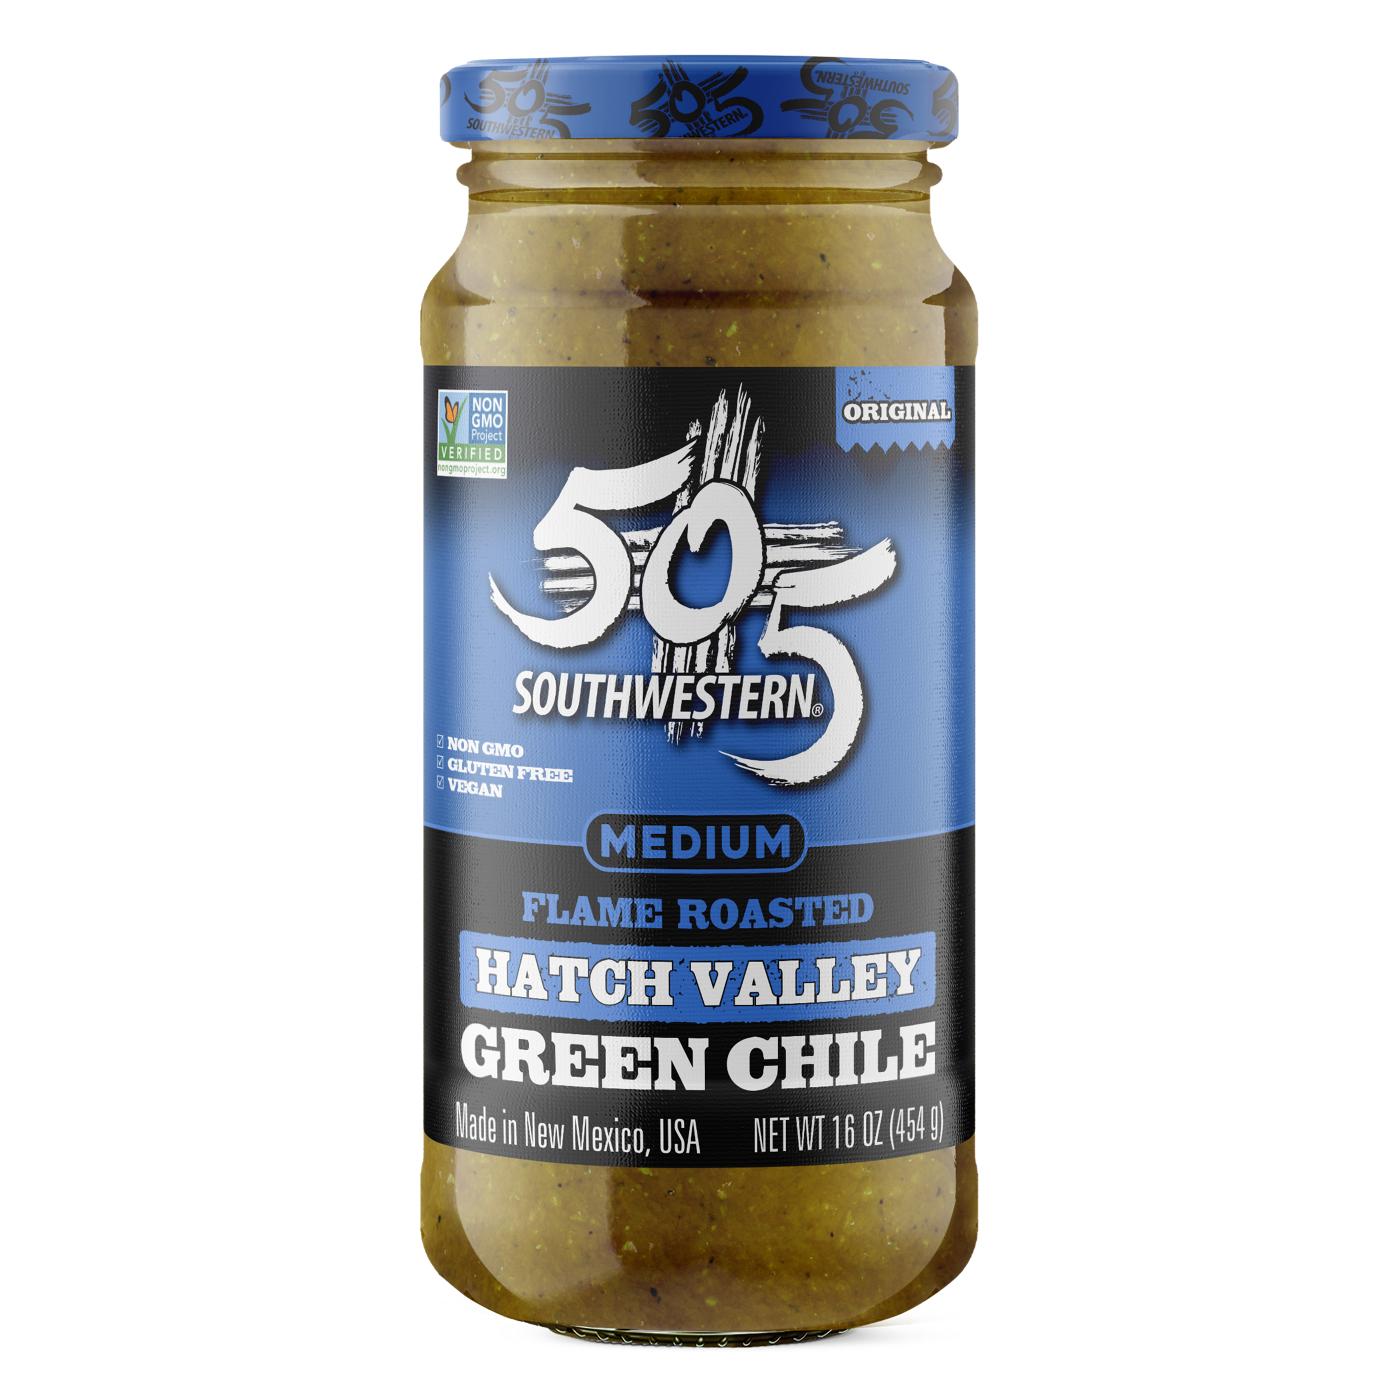 505 Southwestern Medium Flame Roasted Hatch Valley Green Chile; image 1 of 2